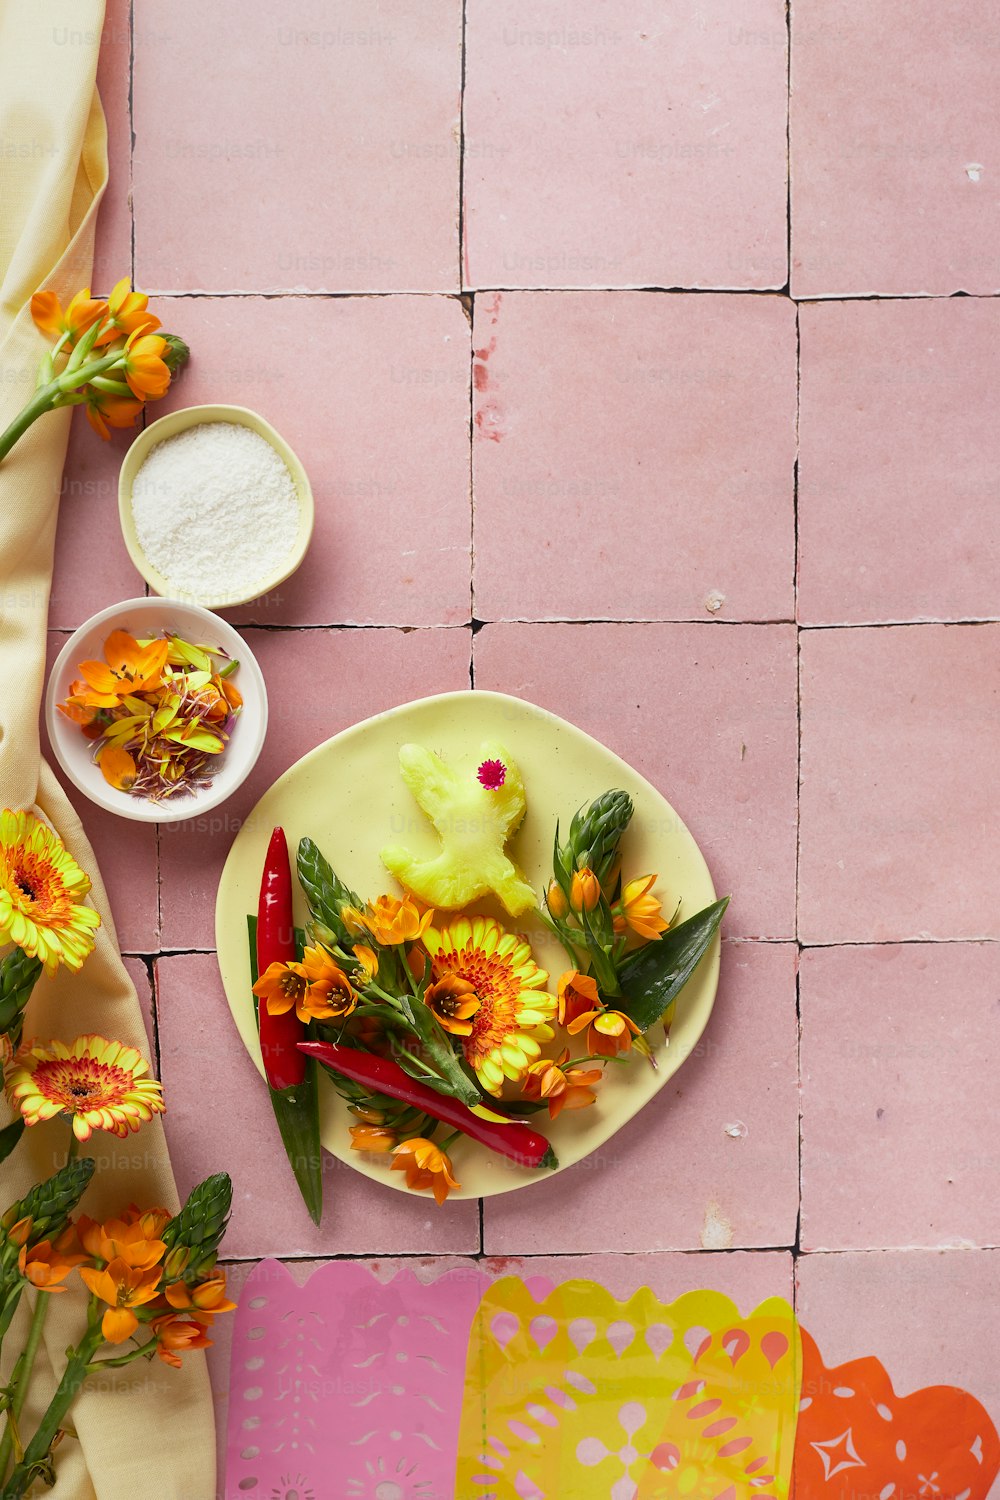 a plate of food on a pink tile floor